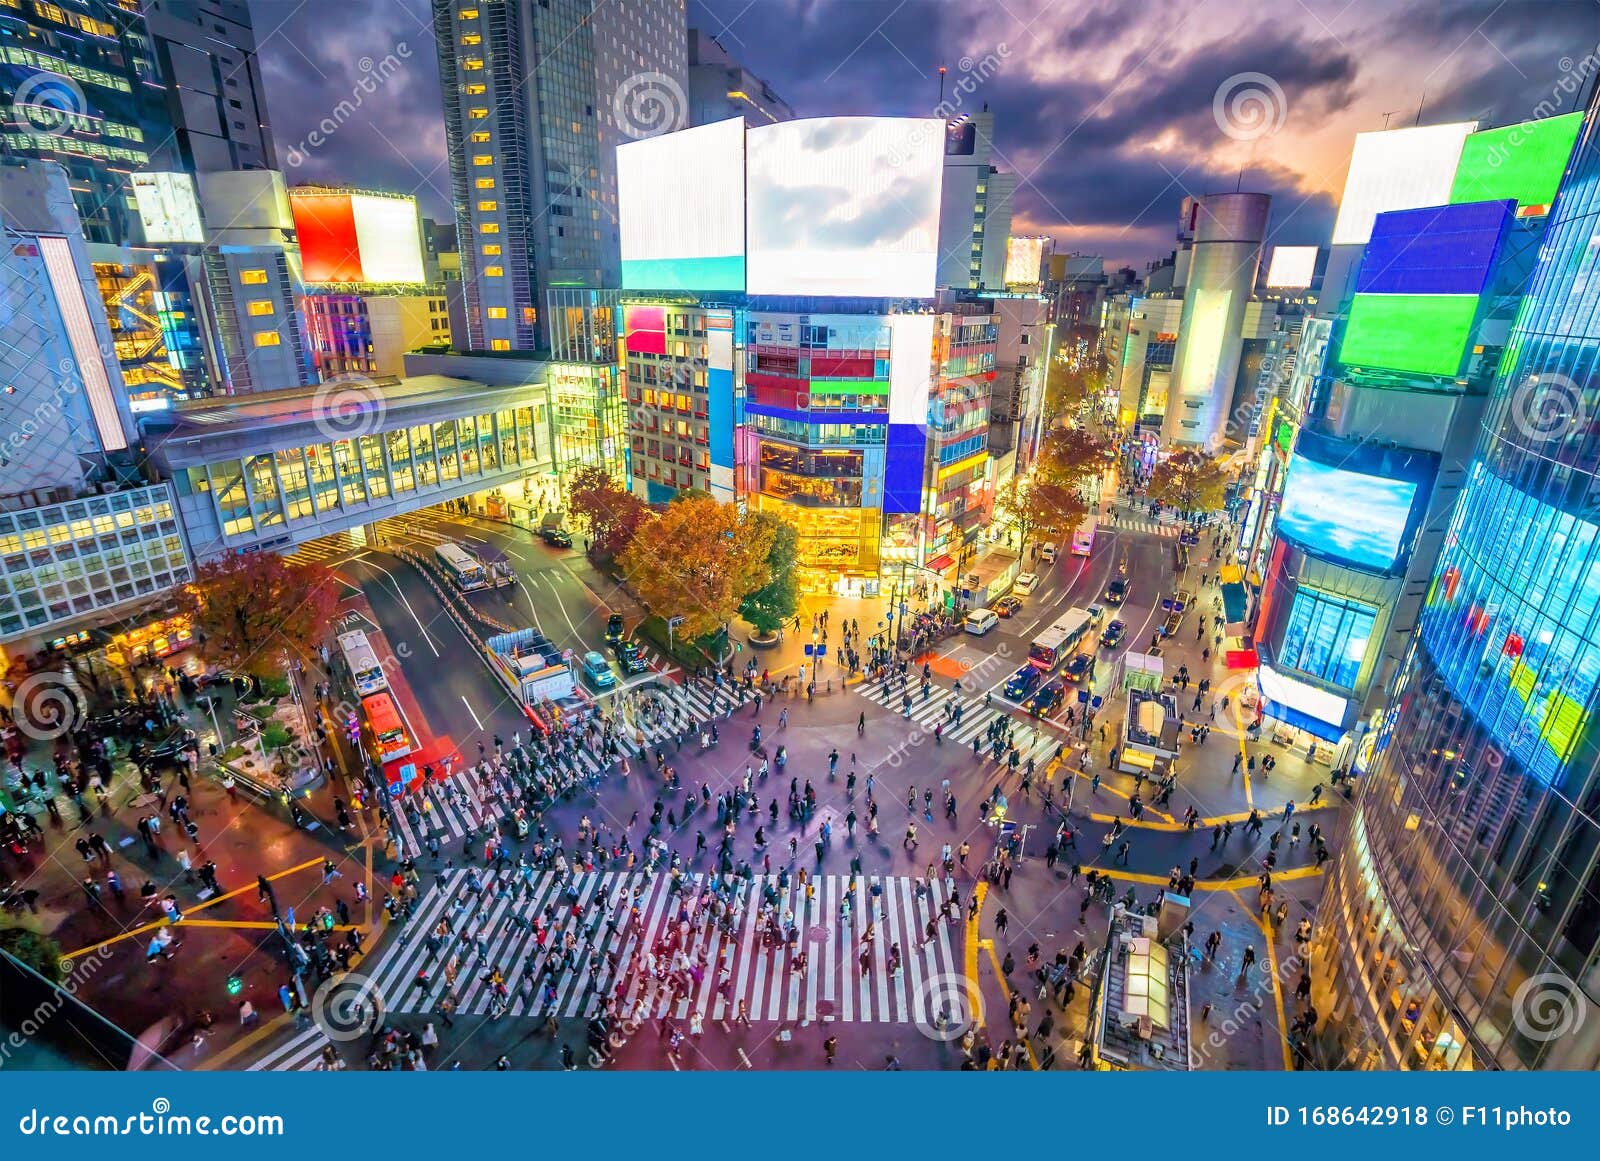 Shibuya Crossing From Top View At Twilight In Tokyo Stock Photo Image Of Pedestrian Downtown